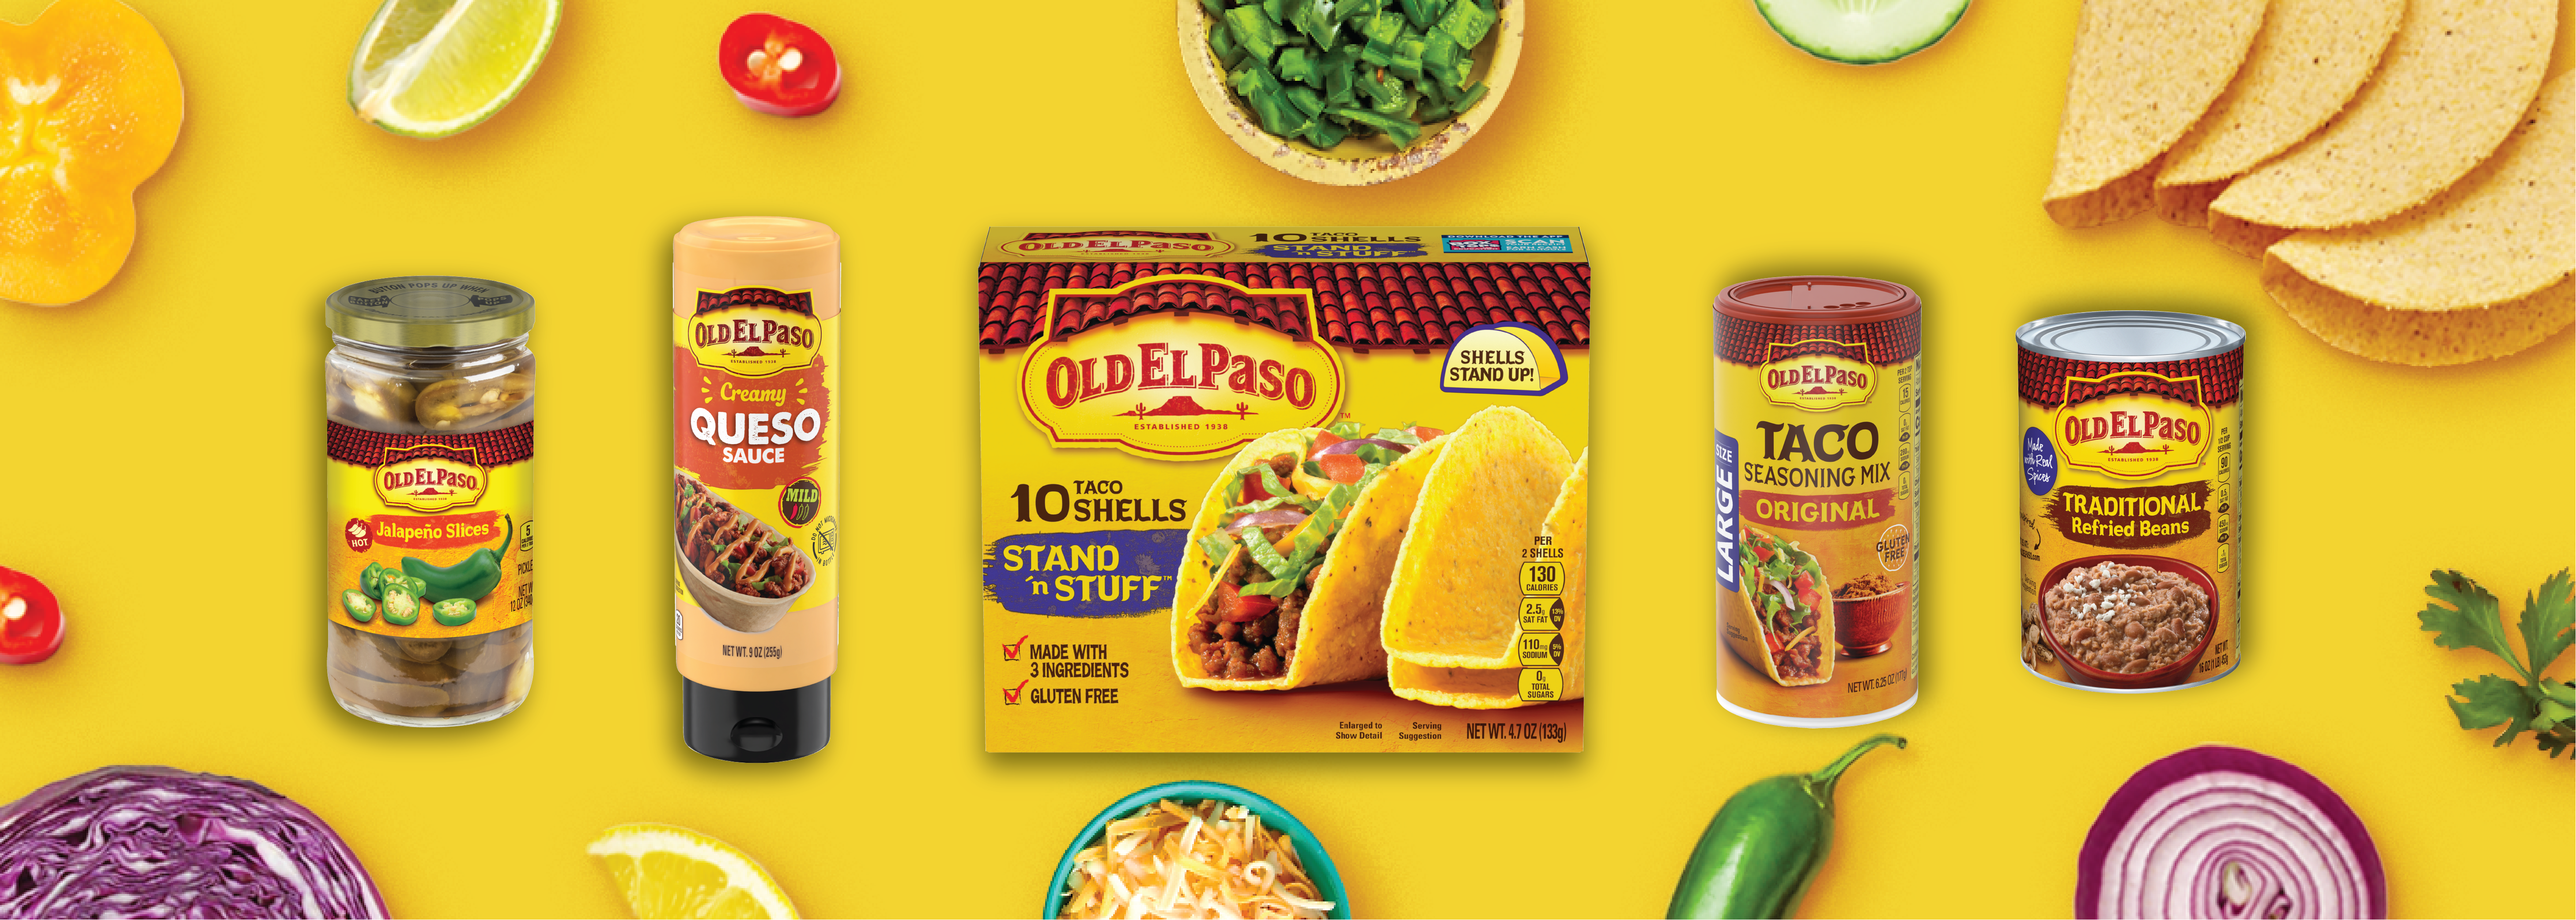 Old El Paso assorted products including Jalapeño slices, front of jar; Creamy Queso sauce, front of package; Stand n' Stuff taco shells, front of box; Original taco seasoning mix, front of package; and Traditional refried beans, front of can, on a yellow background surrounded by taco ingredients